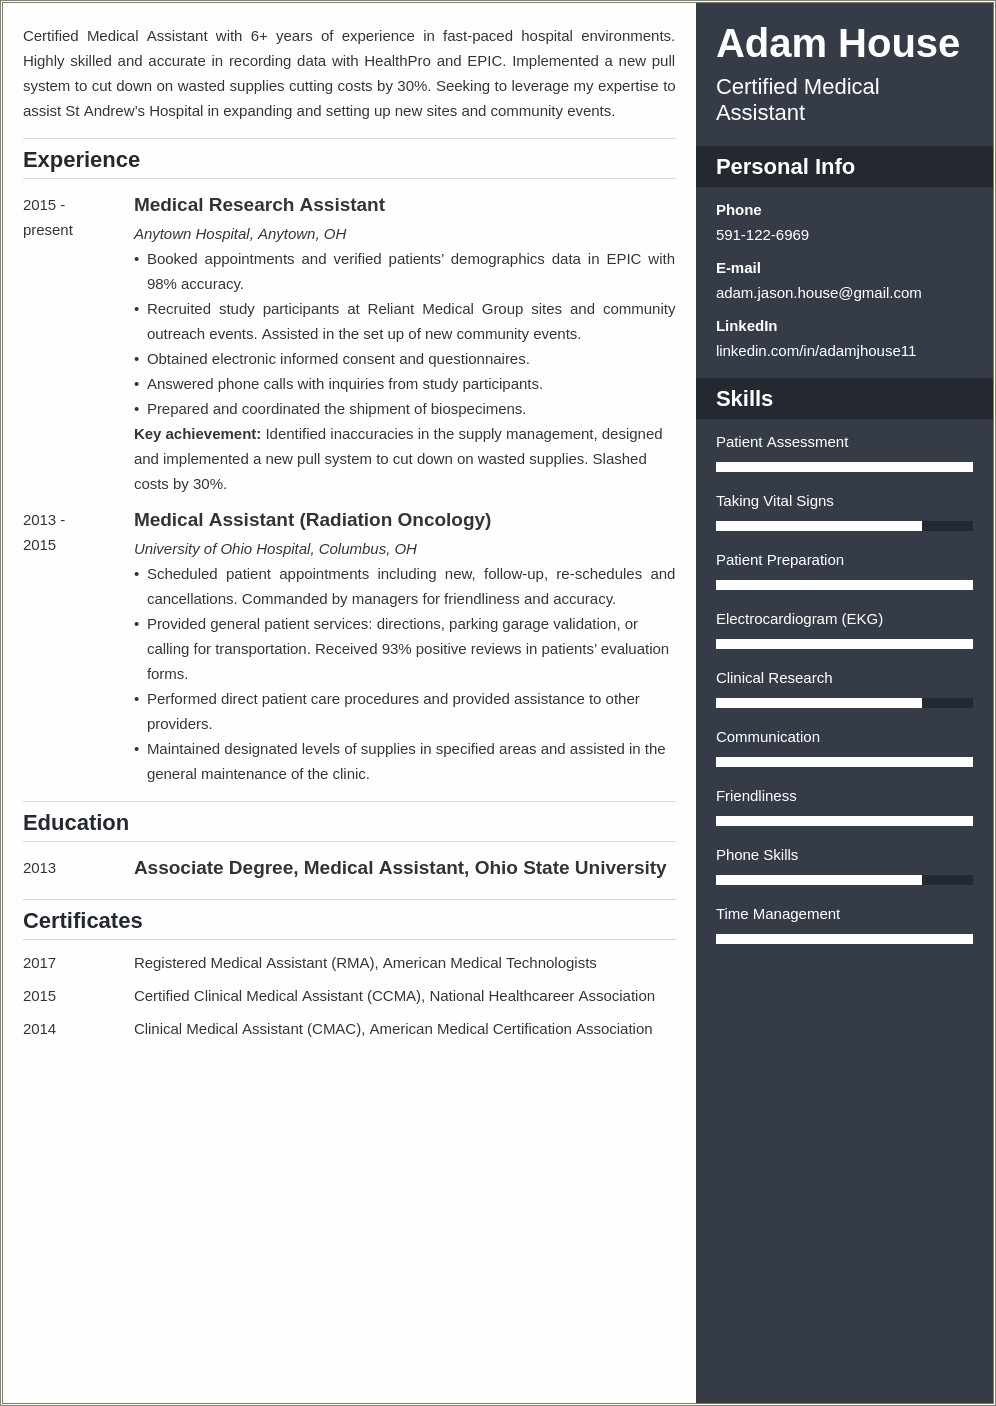 Medical Assistant Resume Objective Examples Monster.commonster.com